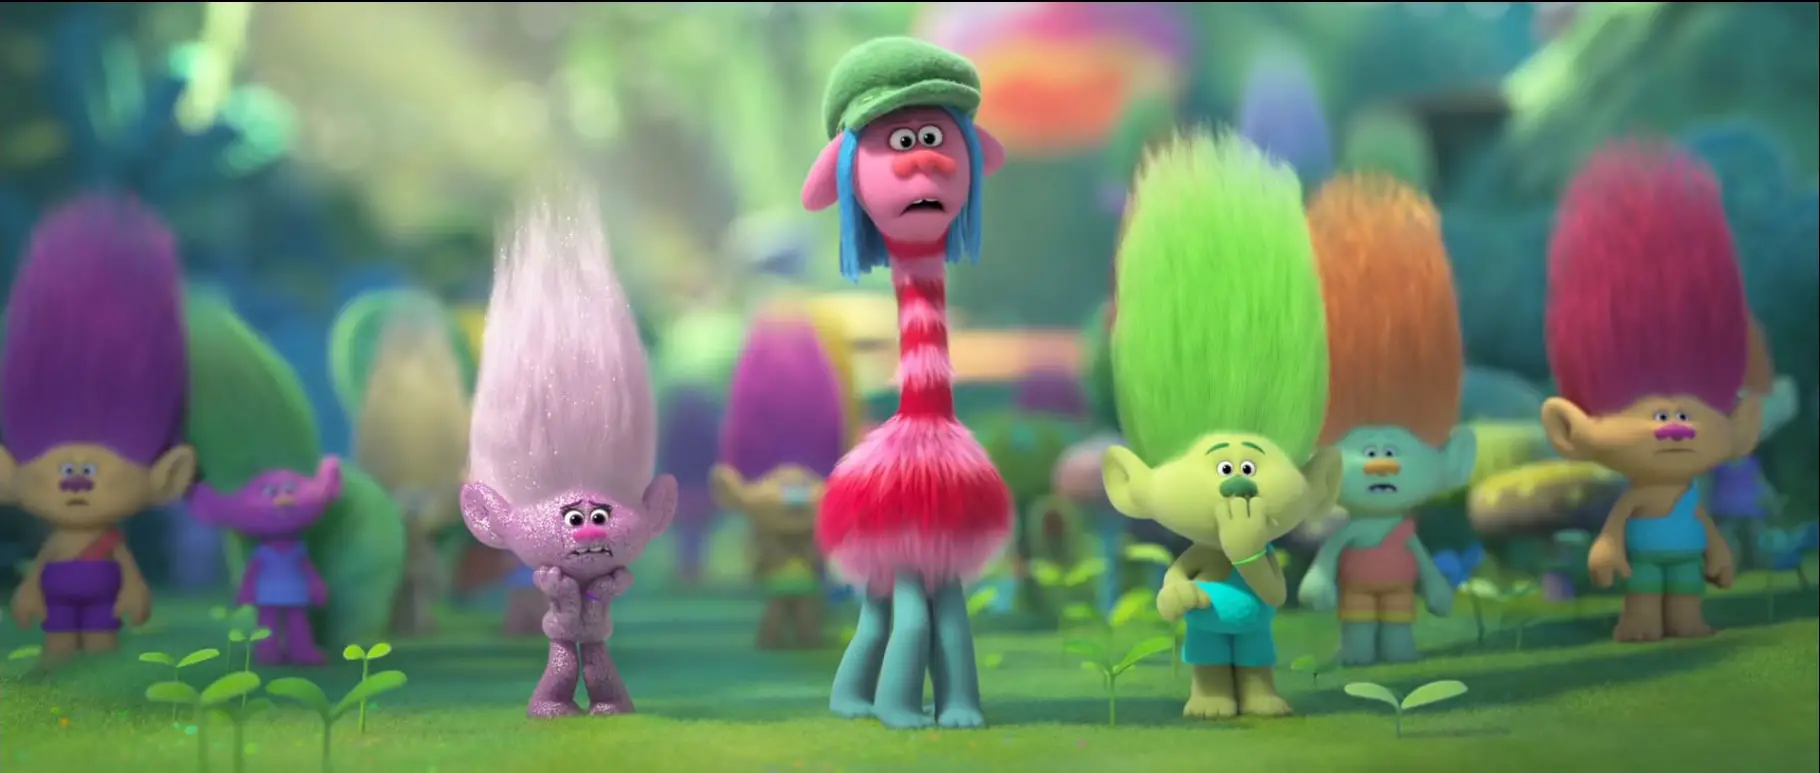 Trolls World Tour is a sequel to a highly successul animated comedy movie. 